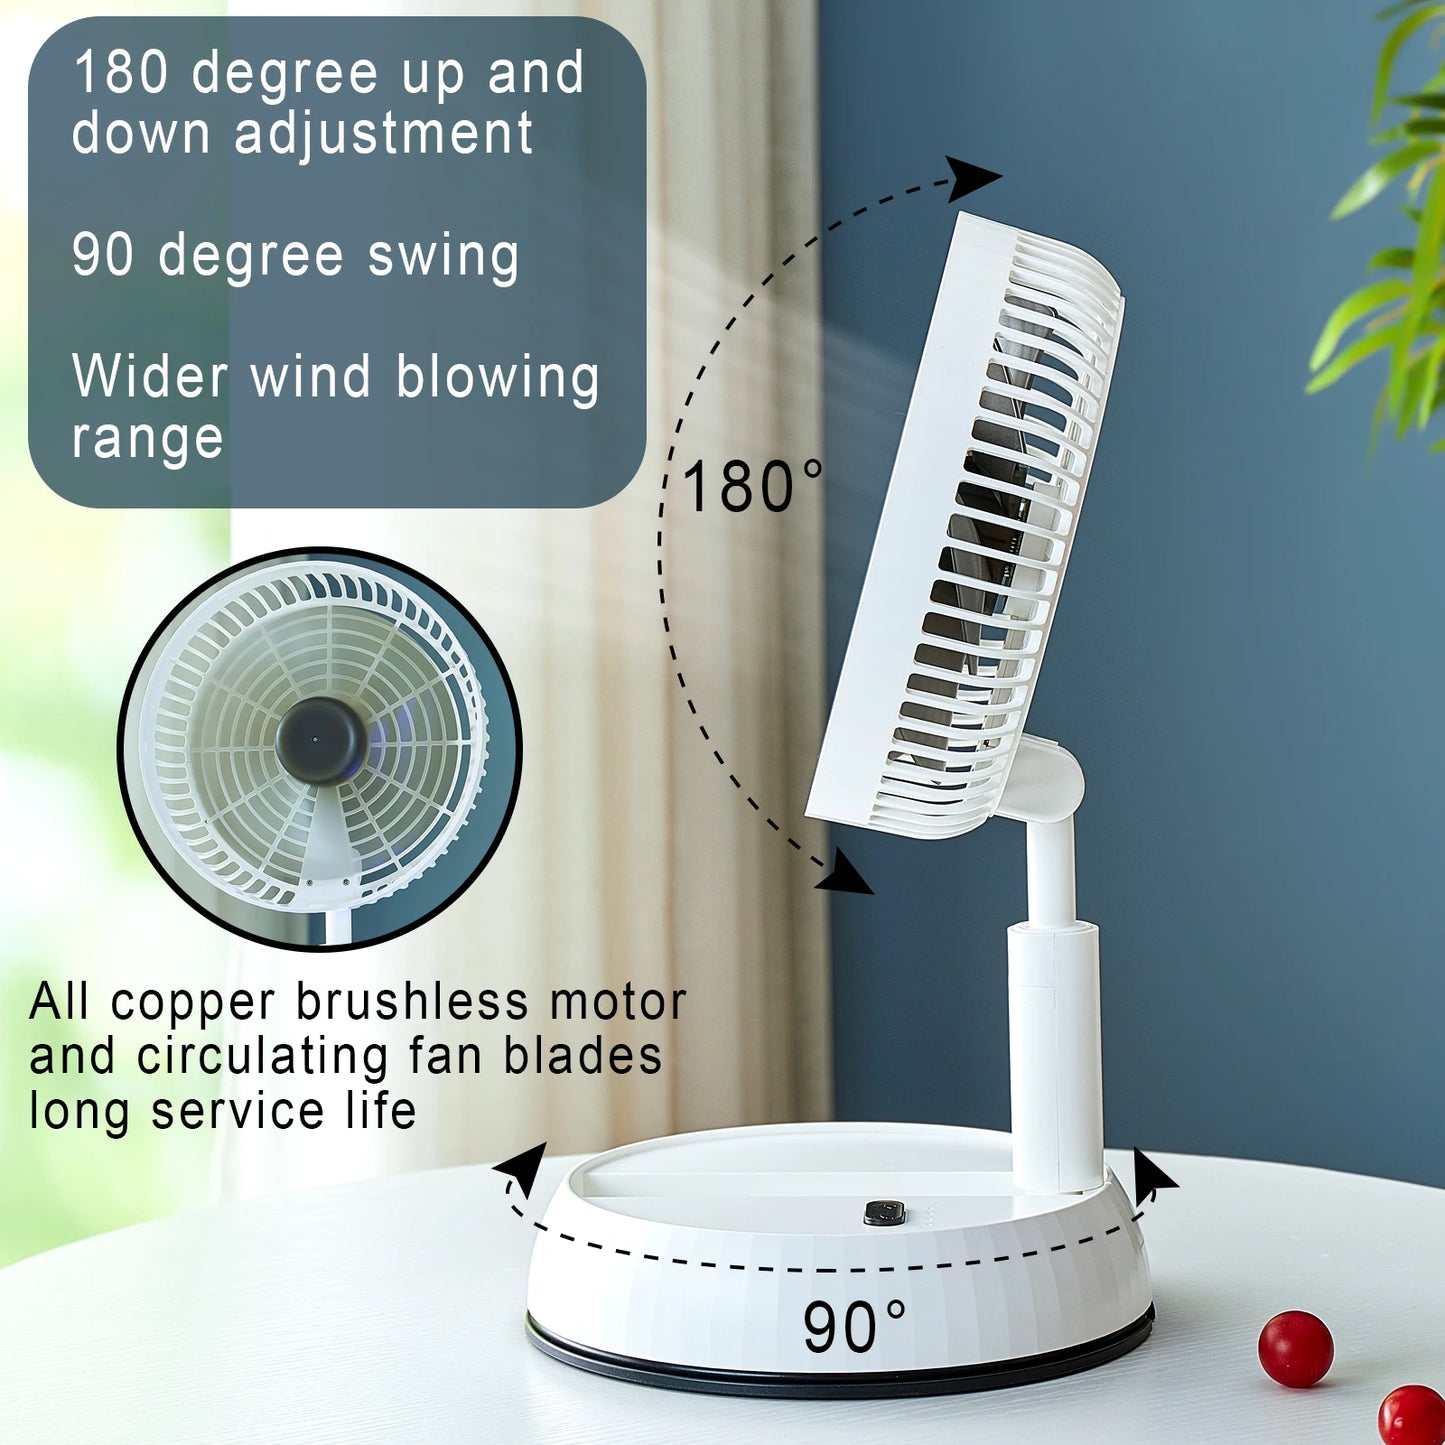 New Gale Telescopic Folding Fan – Rechargeable USB Fan with Remote Control for Outdoor and Home Use